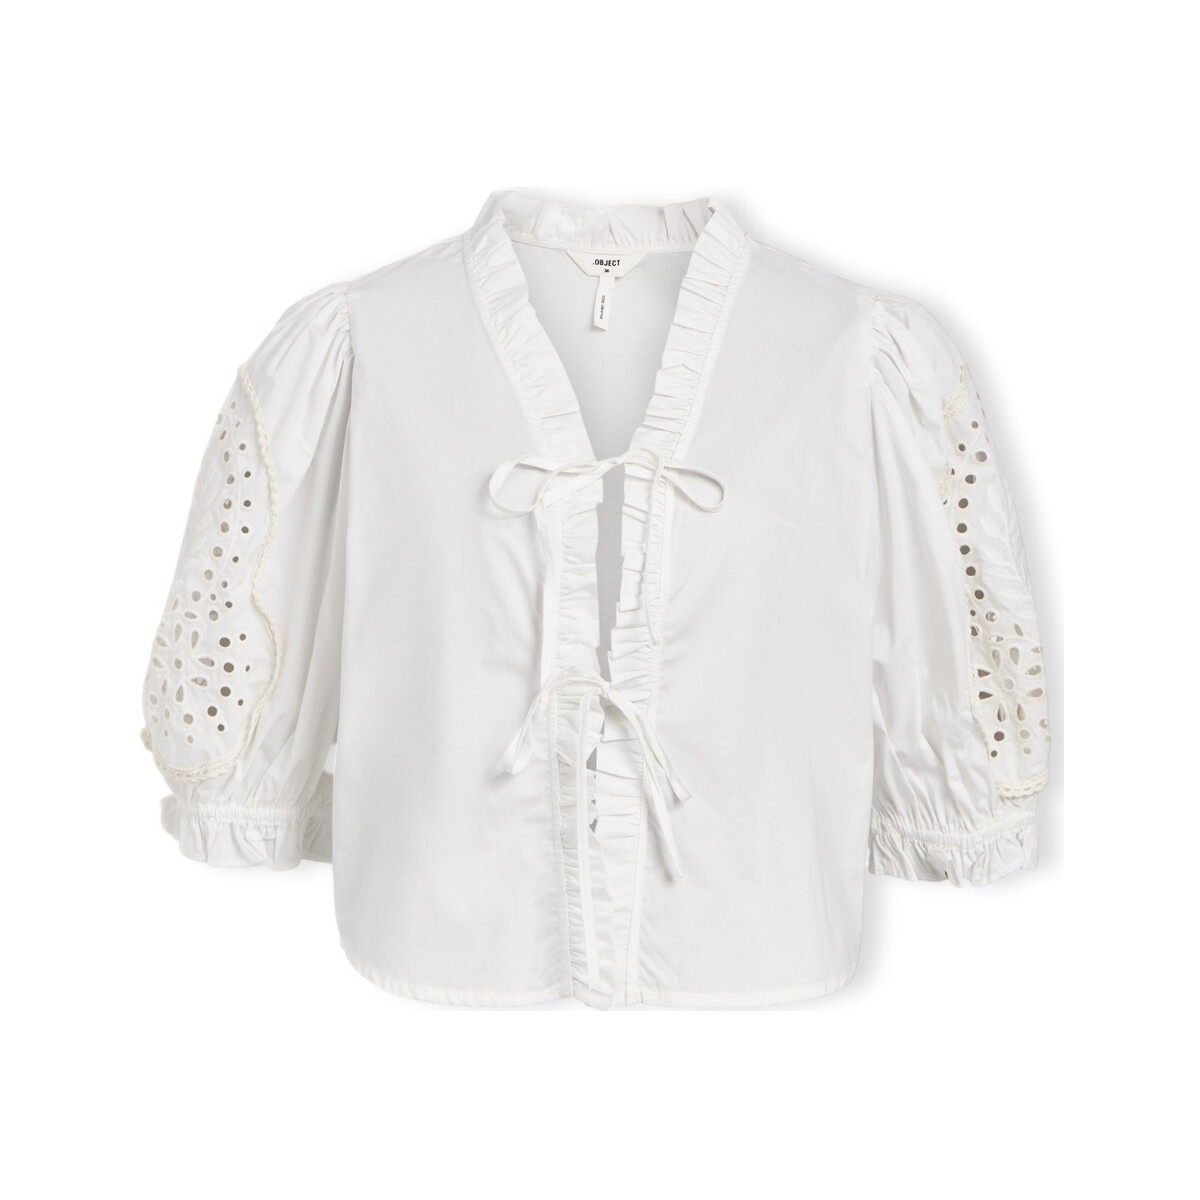 Vêtements Femme Tops / Blouses Object Top Brodera S/S - White Sand Blanc